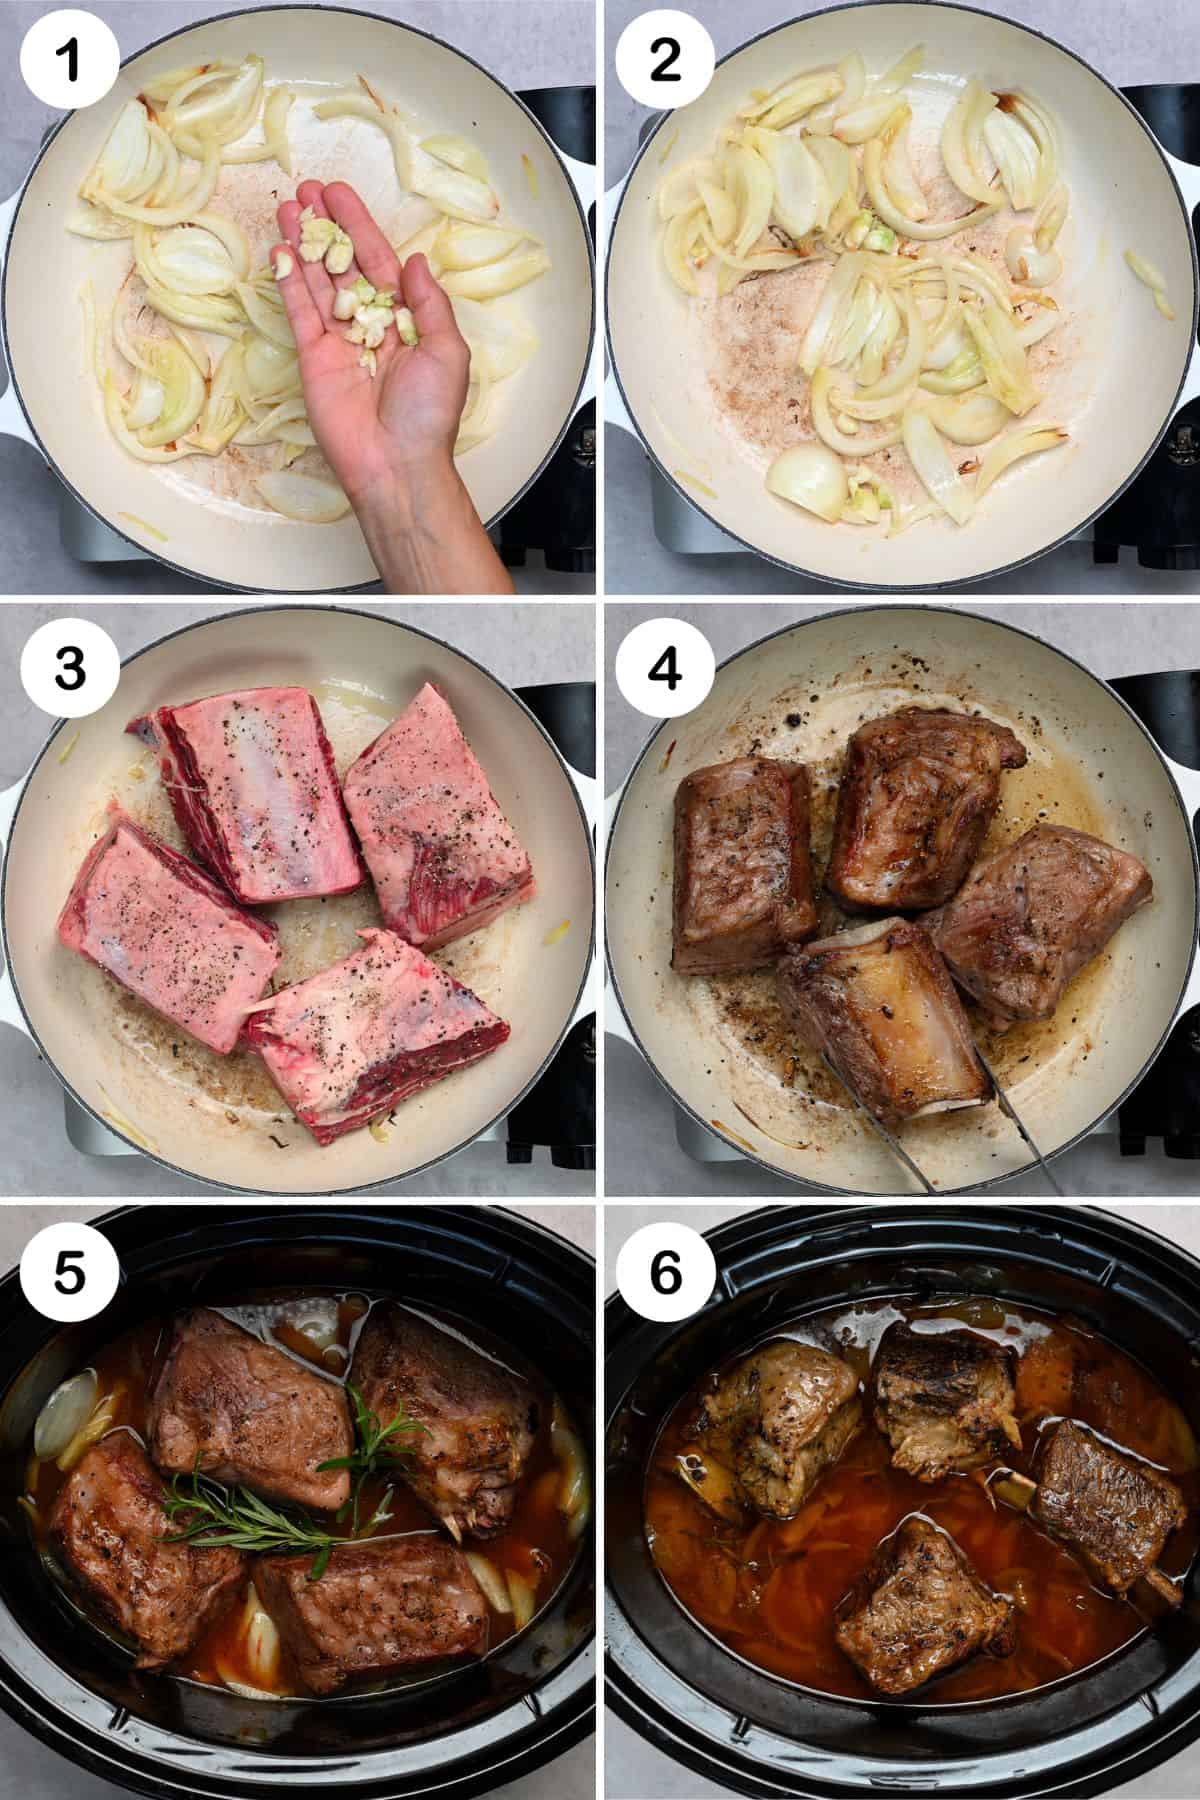 Steps for searing and slow cooking short ribs